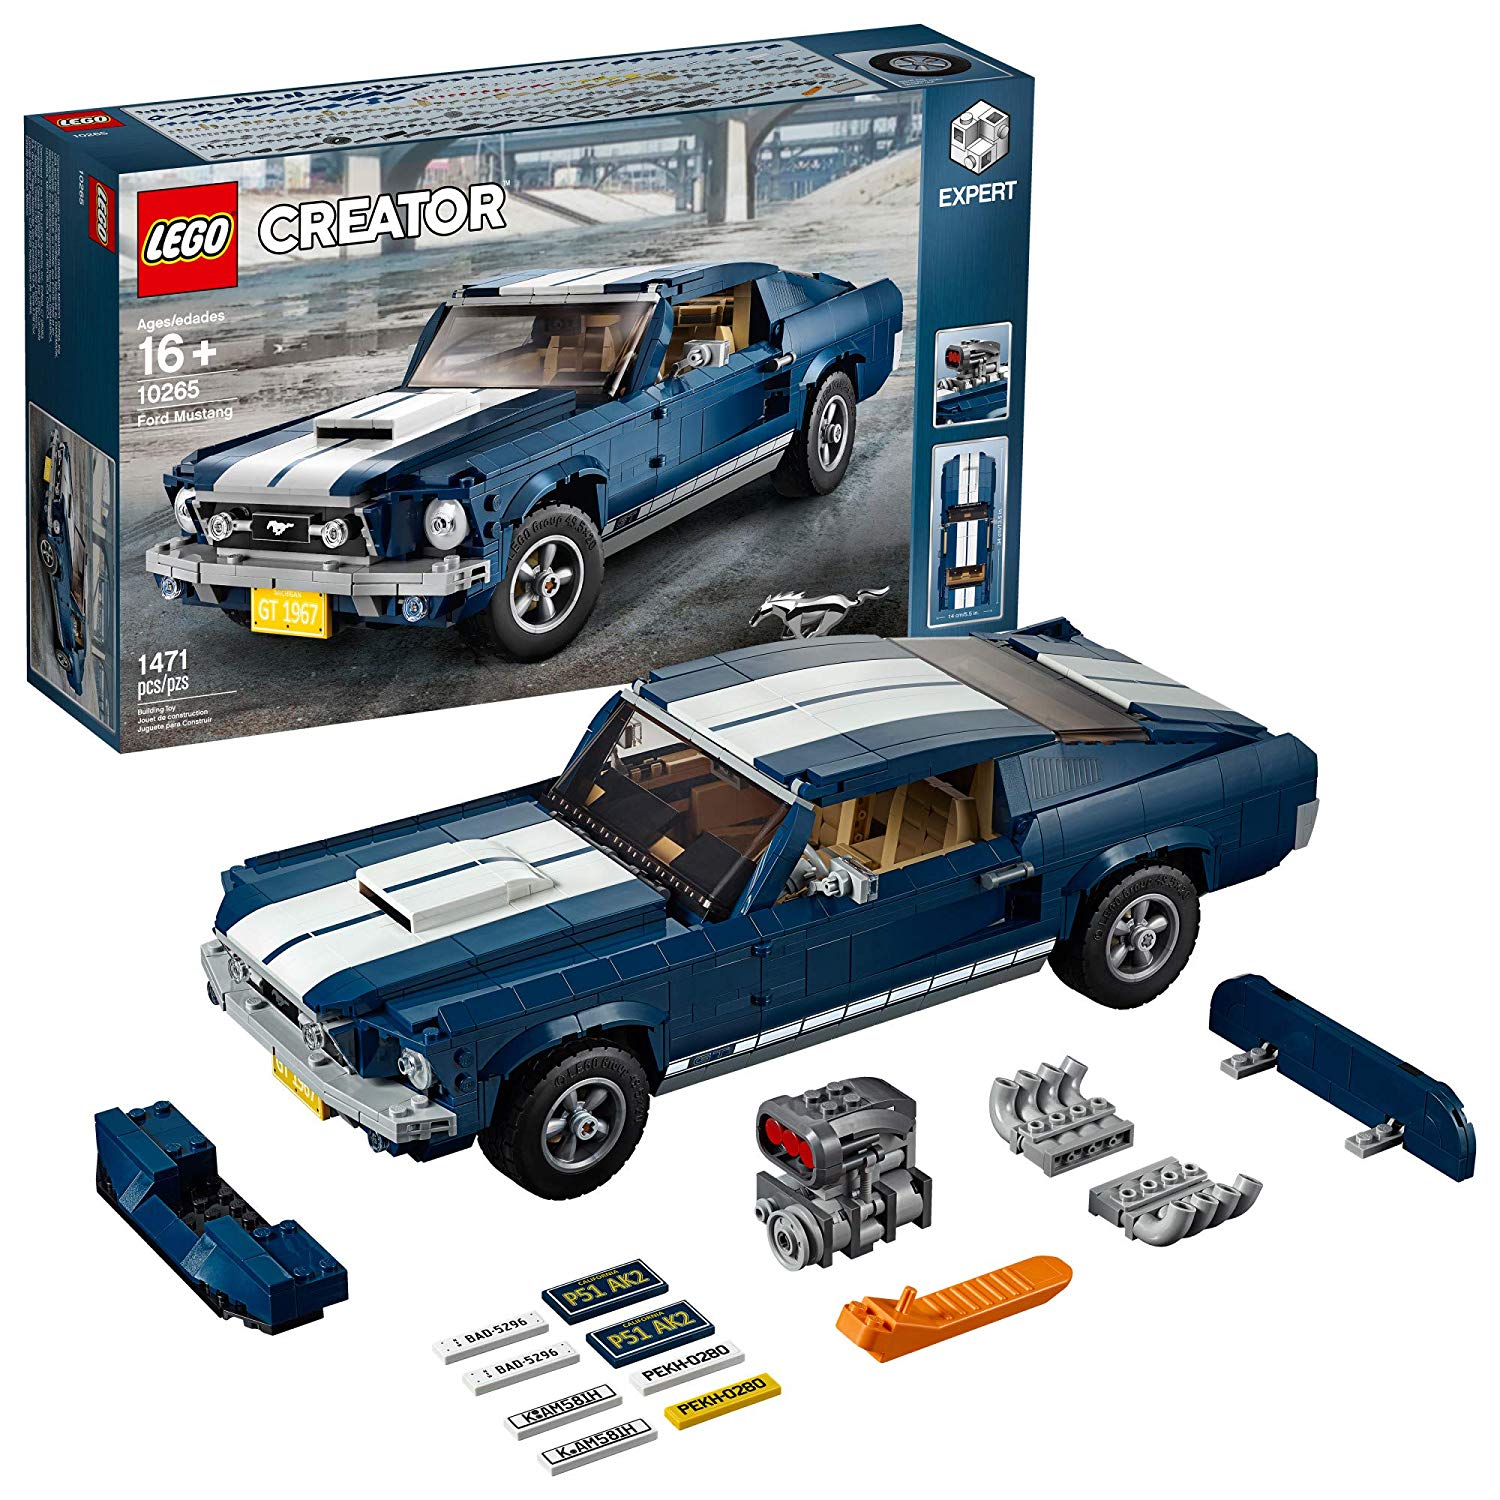 Lego Creator 10265 1967 Ford Mustang Fastback (1471 Pieces)